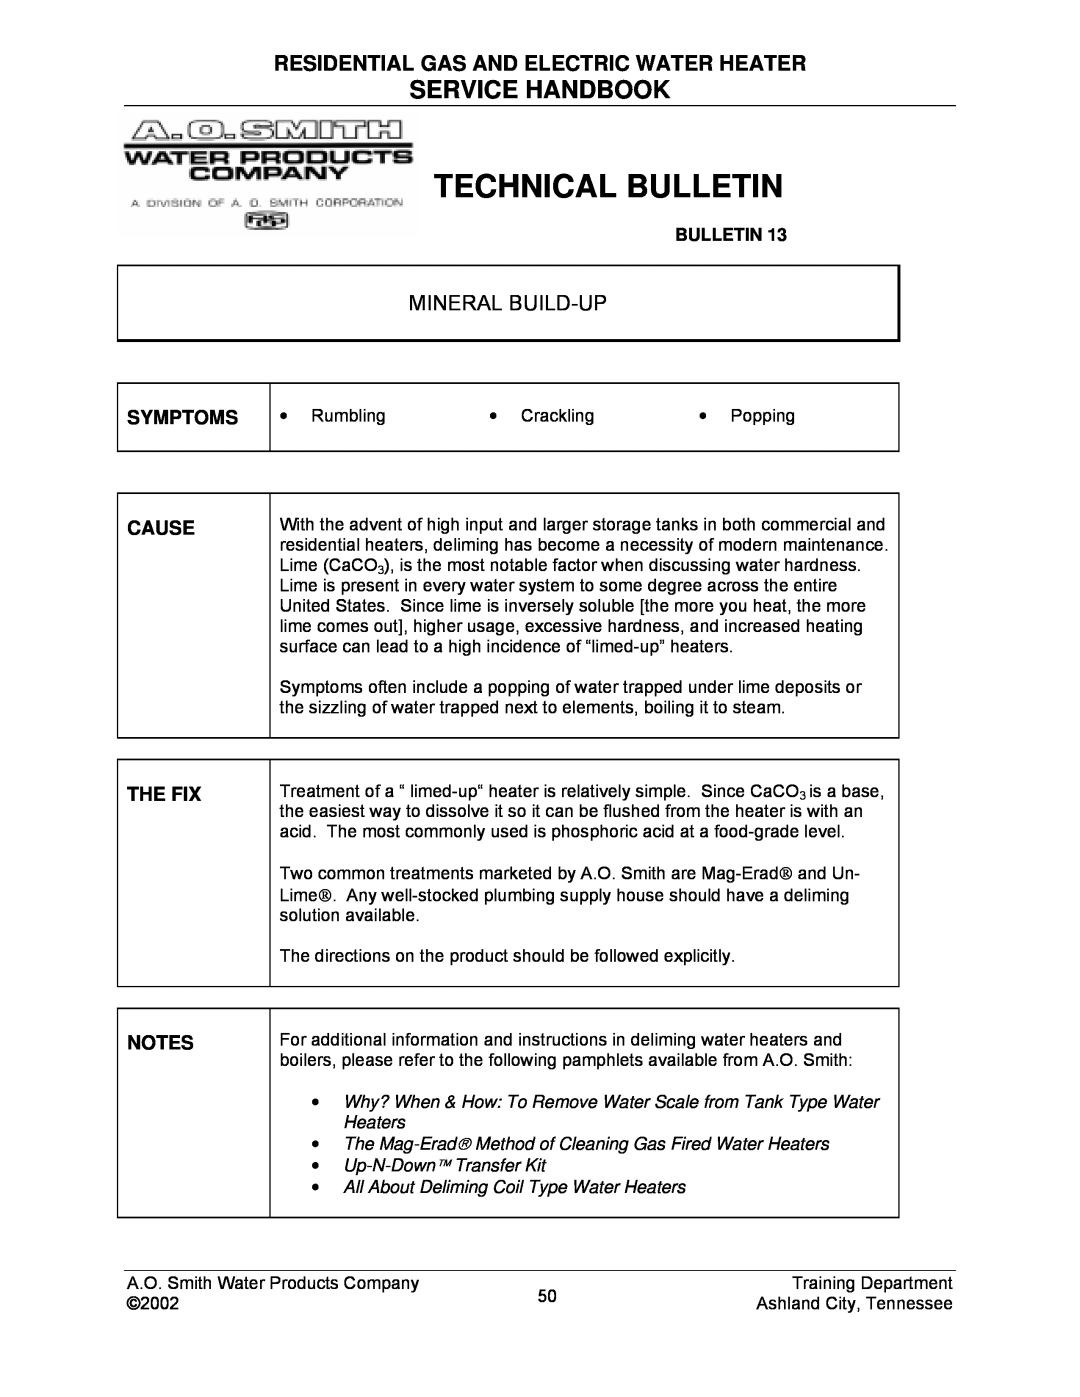 A.O. Smith TC-049-R2 Technical Bulletin, Service Handbook, Residential Gas And Electric Water Heater, Mineral Build-Up 